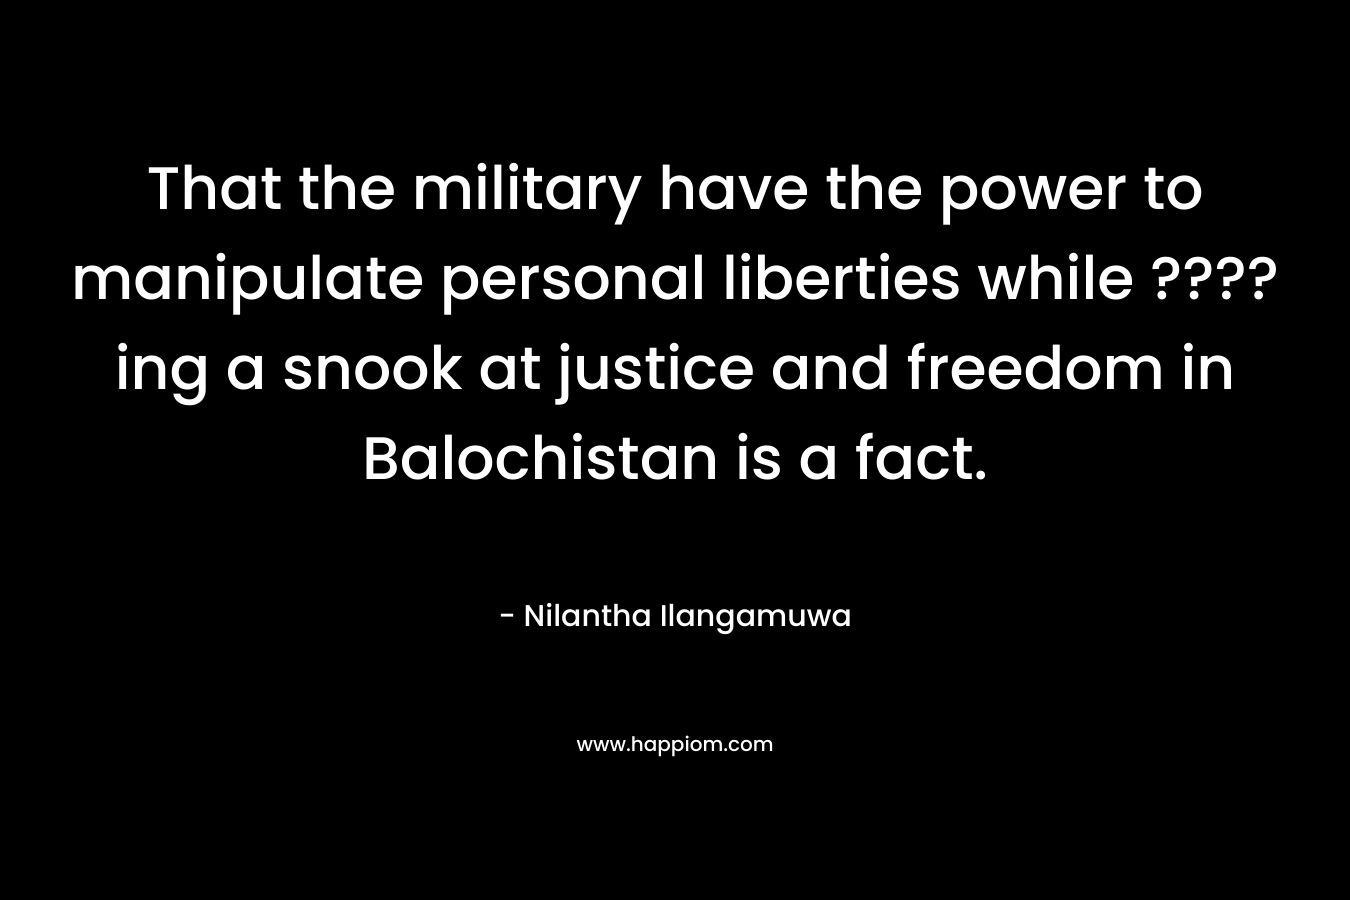 That the military have the power to manipulate personal liberties while ????ing a snook at justice and freedom in Balochistan is a fact. – Nilantha Ilangamuwa